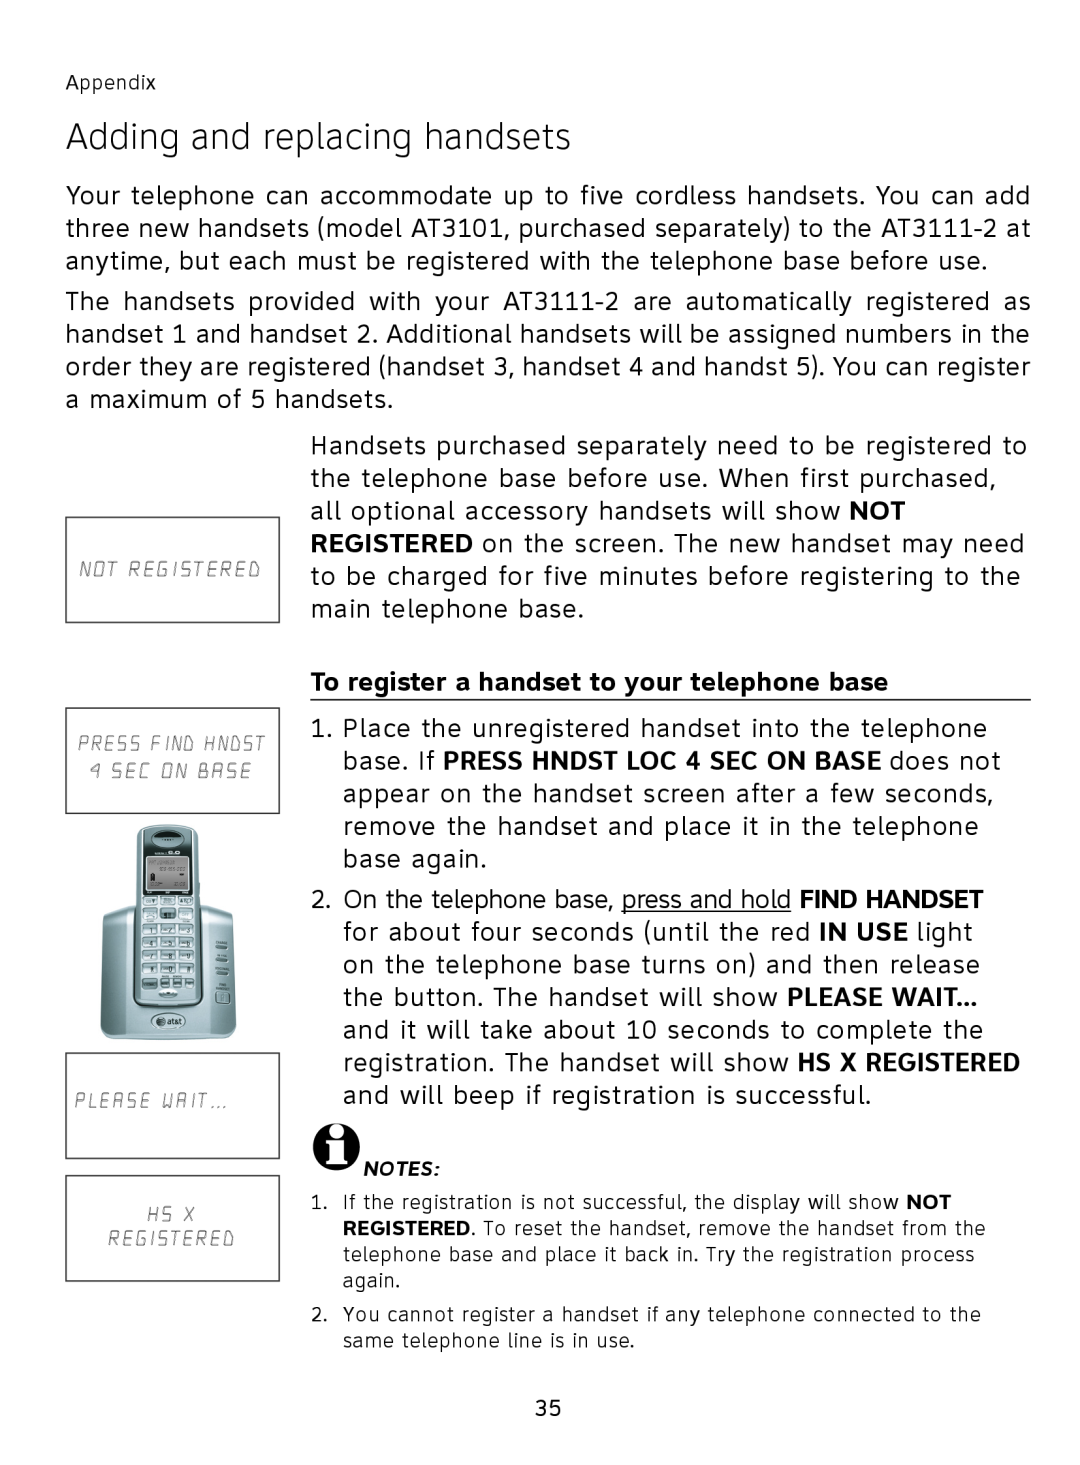 AT&T AT3111-2 user manual Adding and replacing handsets, To register a handset to your telephone base 